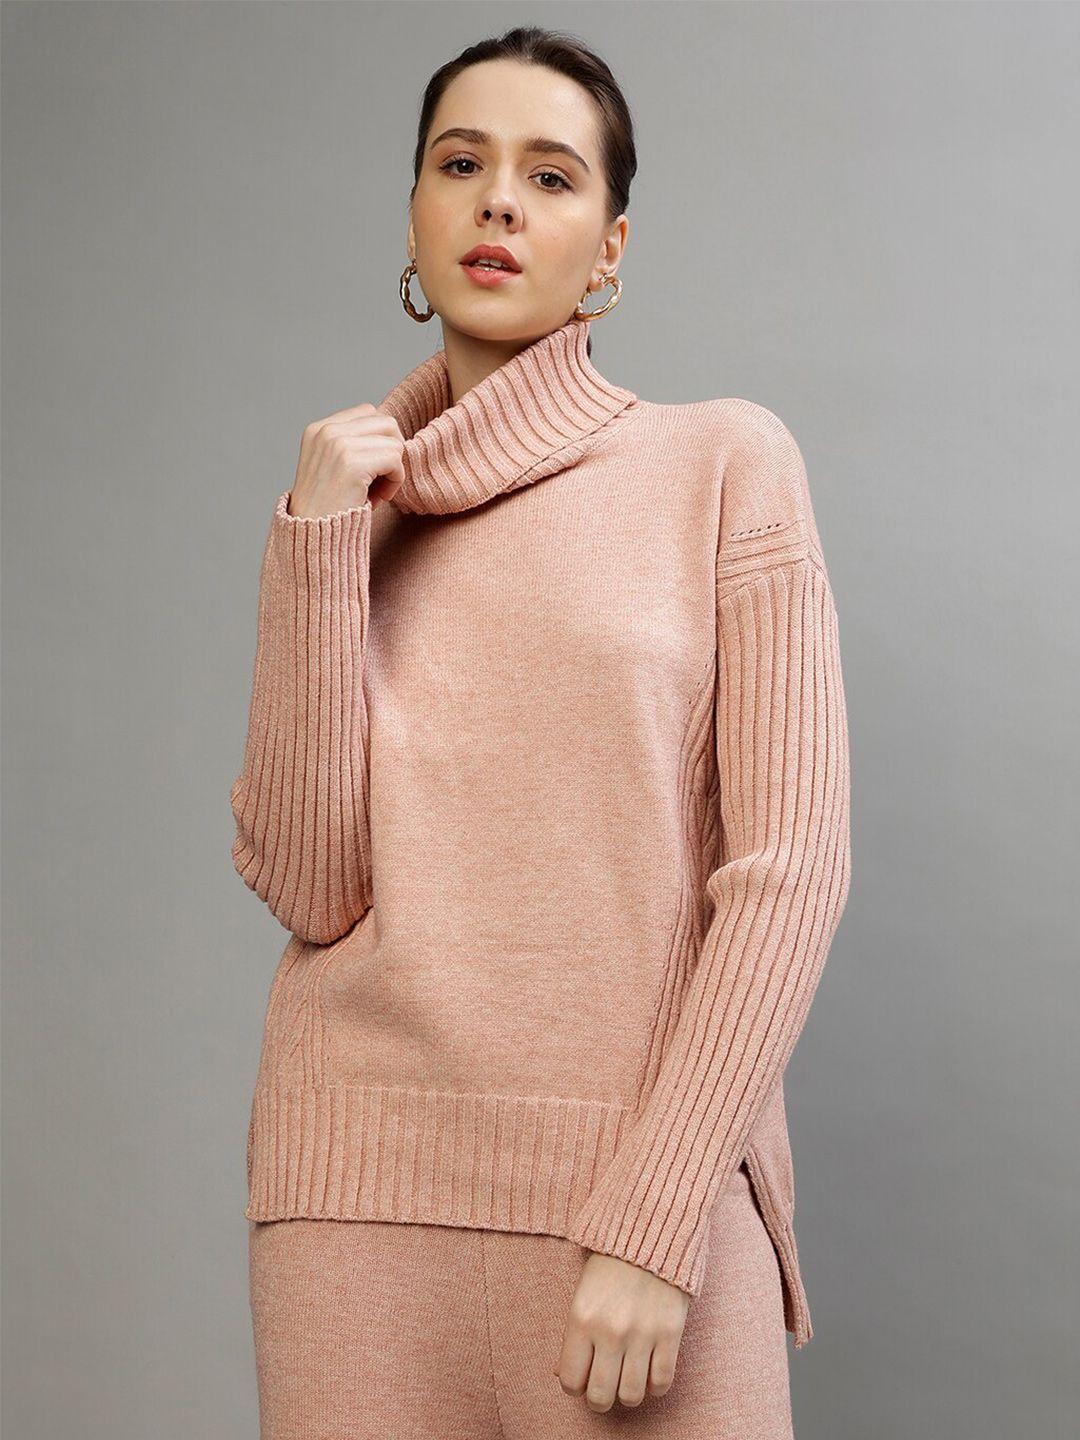 centrestage-cable-knit-self-designed-turtle-neck-pullover